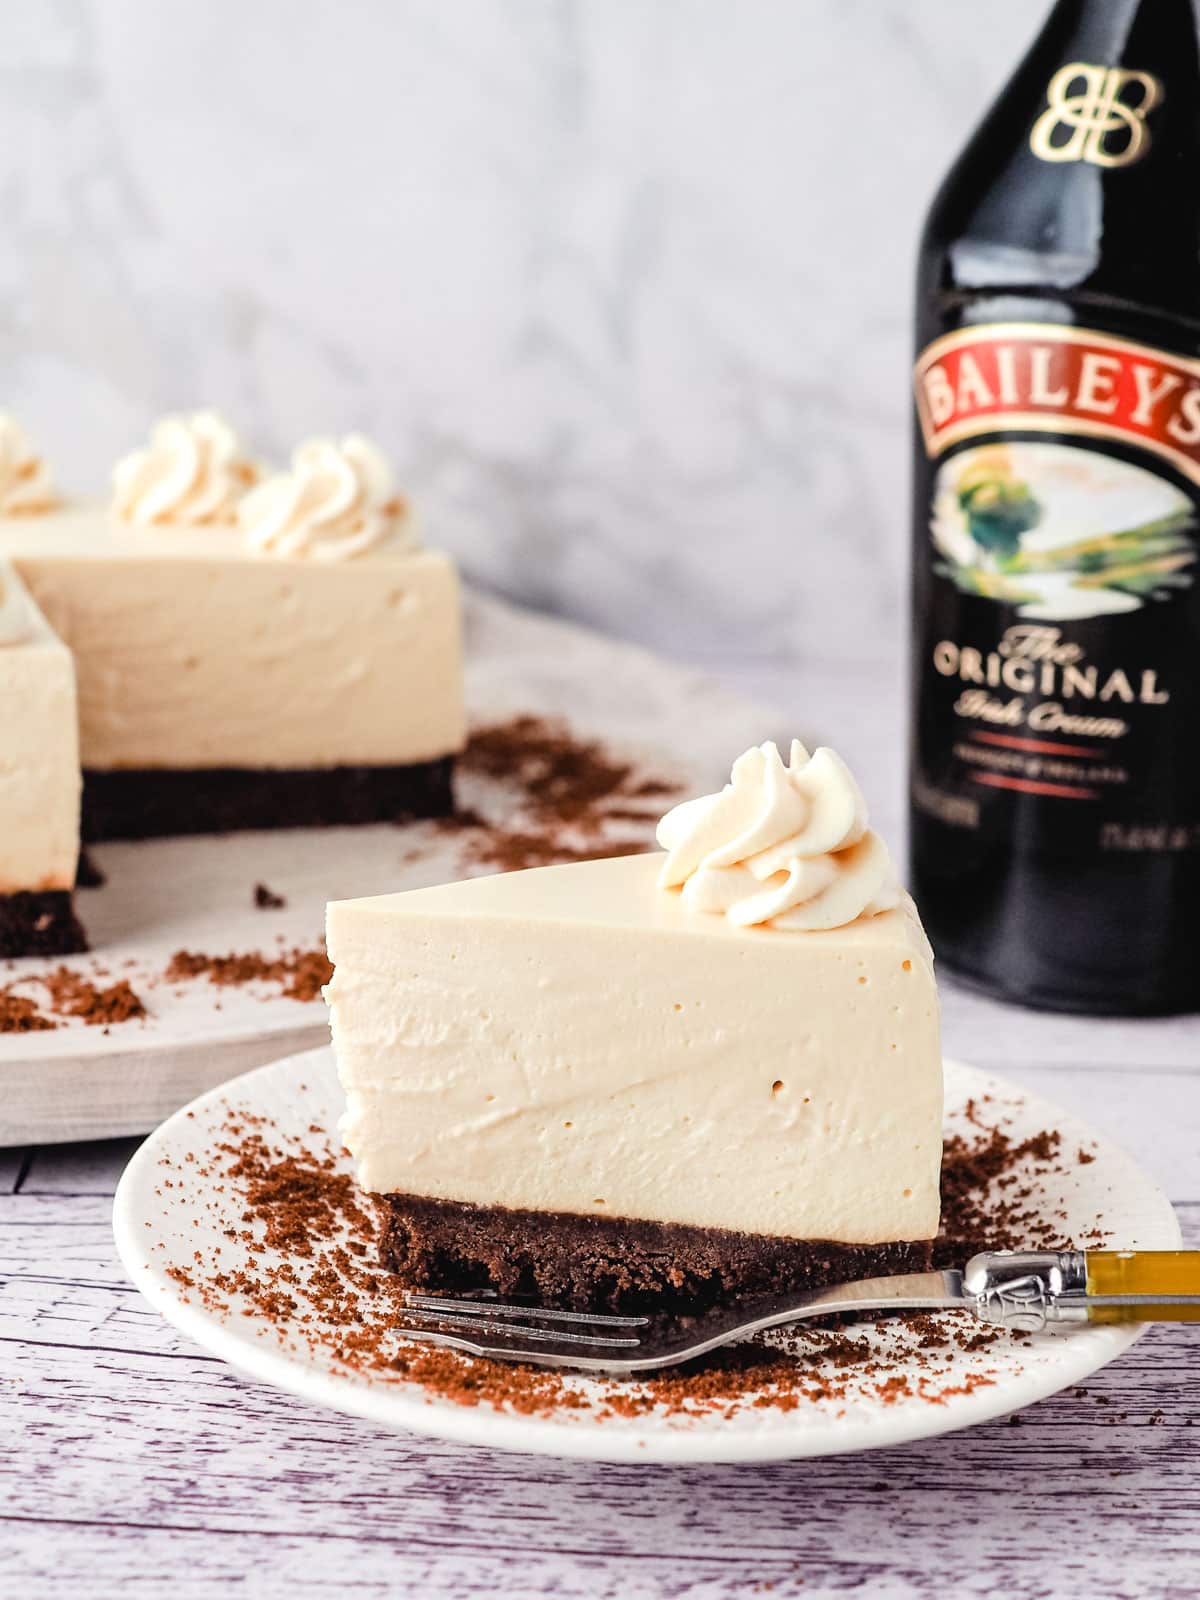 Baileys cheesecake on a plate with cheesecake and Baileys in the background.